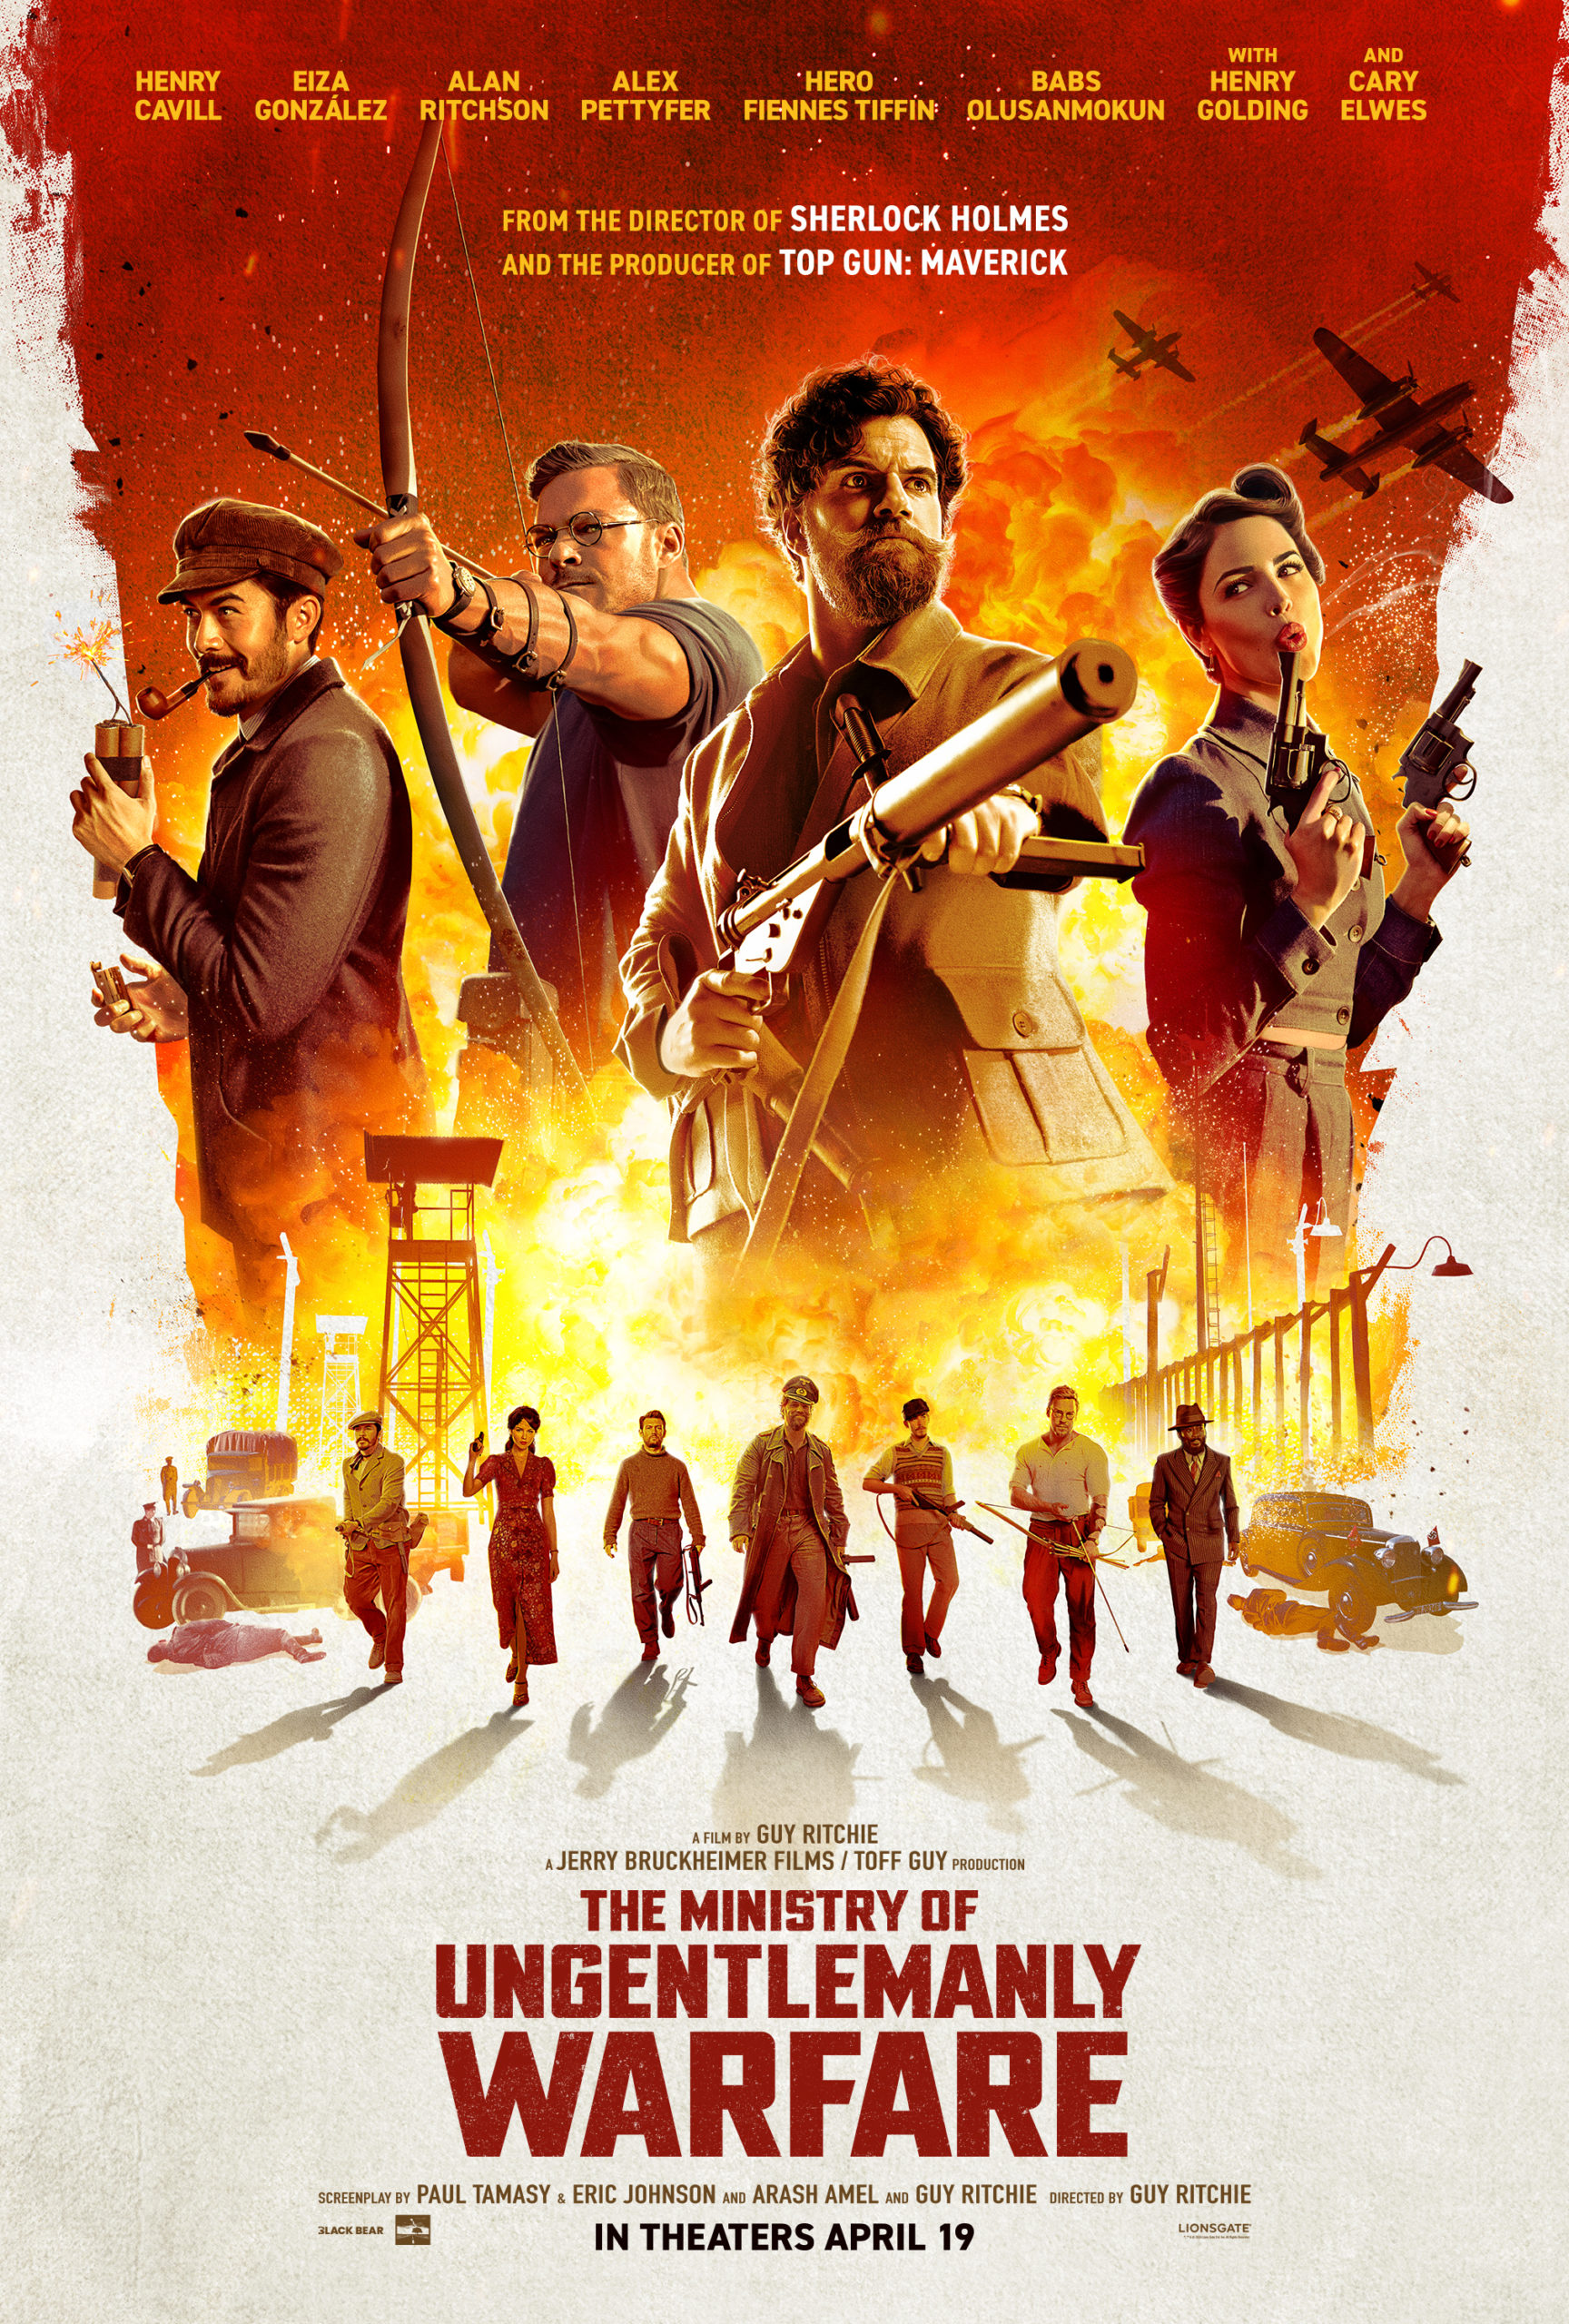 The Ministry of Ungentlemanly Warfare – Review